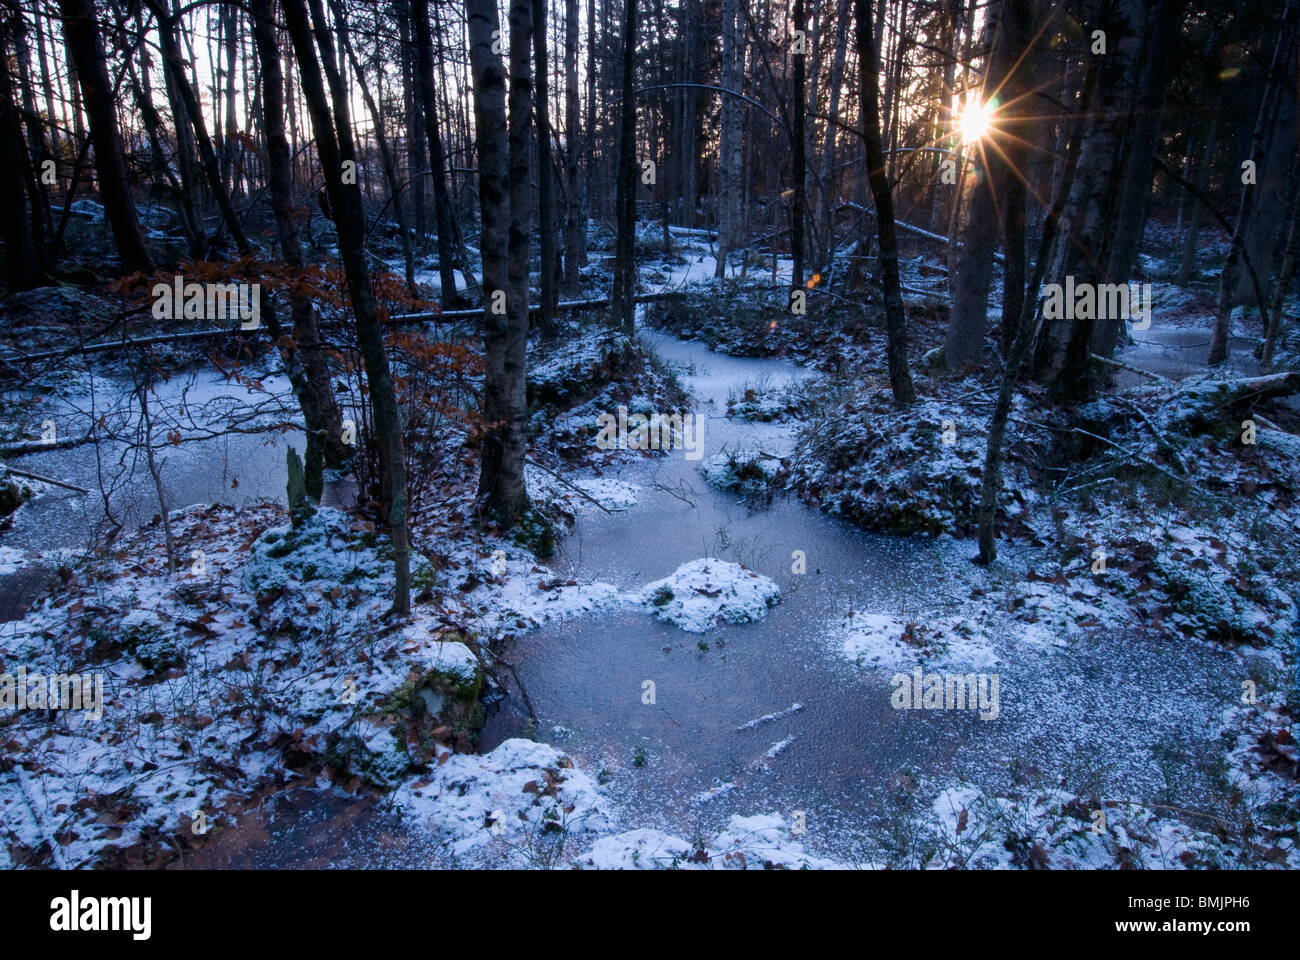 Scandinavia, Sweden, Smaland, View of forest in winter Stock Photo